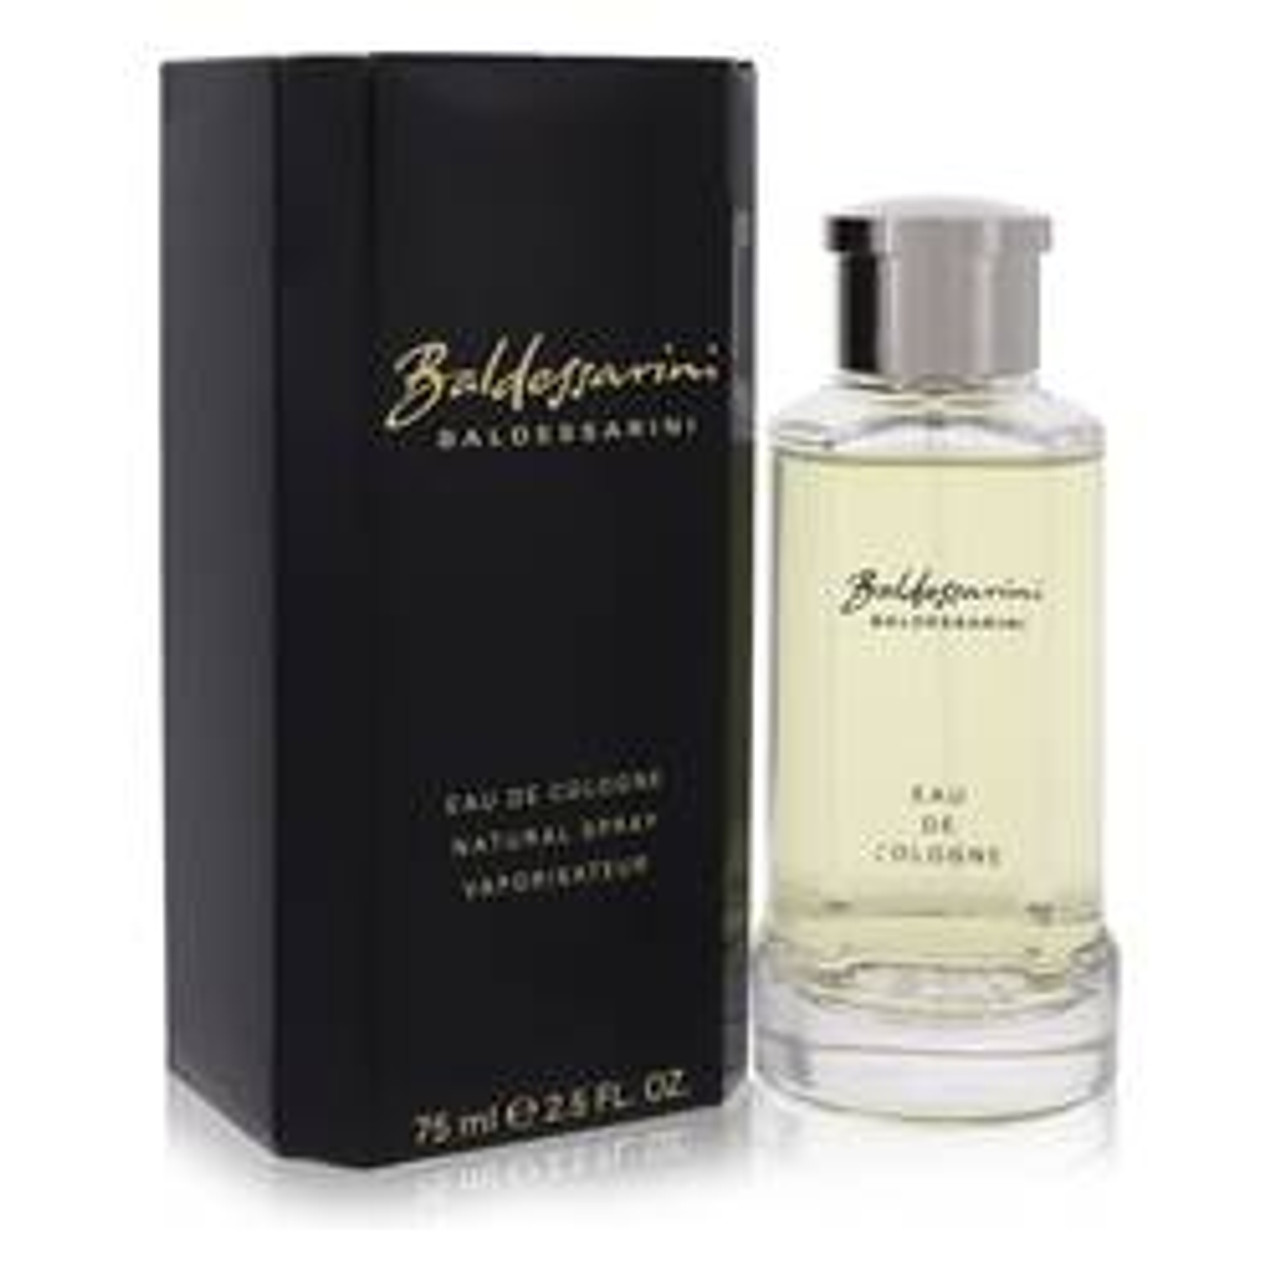 Baldessarini Cologne By Hugo Boss Cologne Spray 2.5 oz for Men - [From 137.00 - Choose pk Qty ] - *Ships from Miami